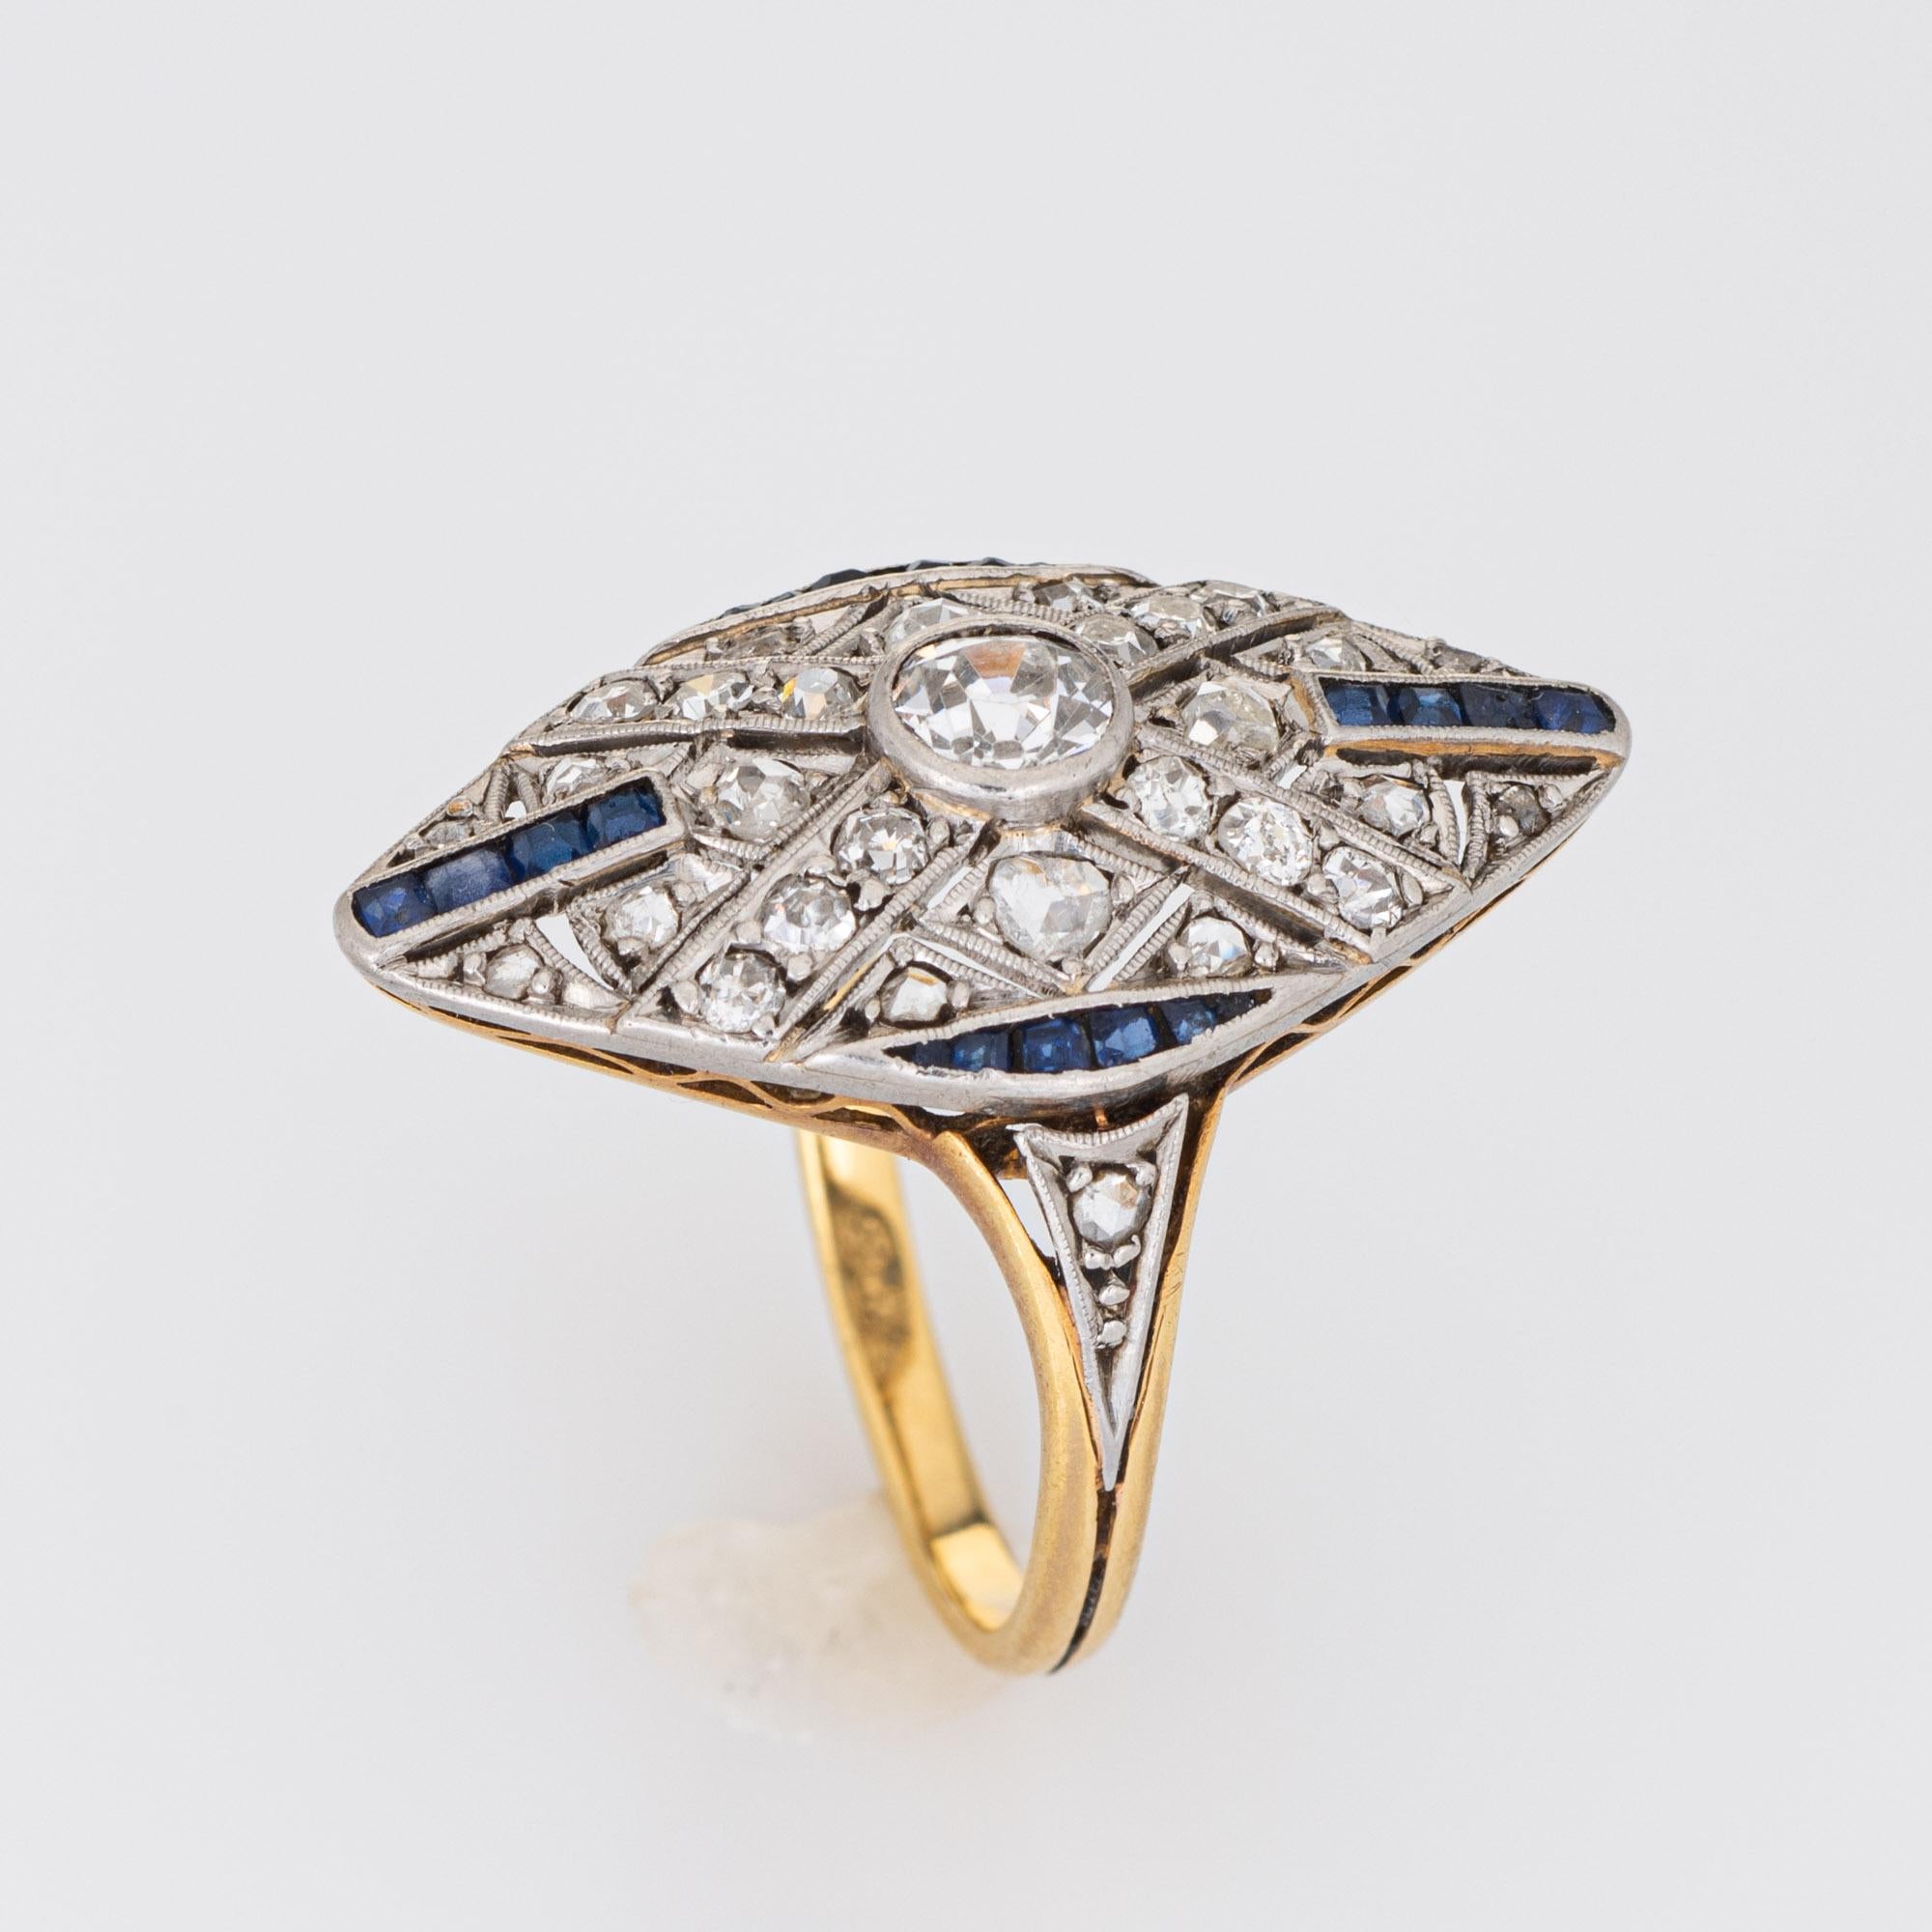 Finely detailed vintage Art Deco diamond cocktail ring (circa 1920s to 1930s) crafted in 18k yellow gold and platinum.

Old European and rose cut diamonds total an estimated 0.60 carats (estimated at I-J color and SI2-I1 clarity). 20 sapphires total